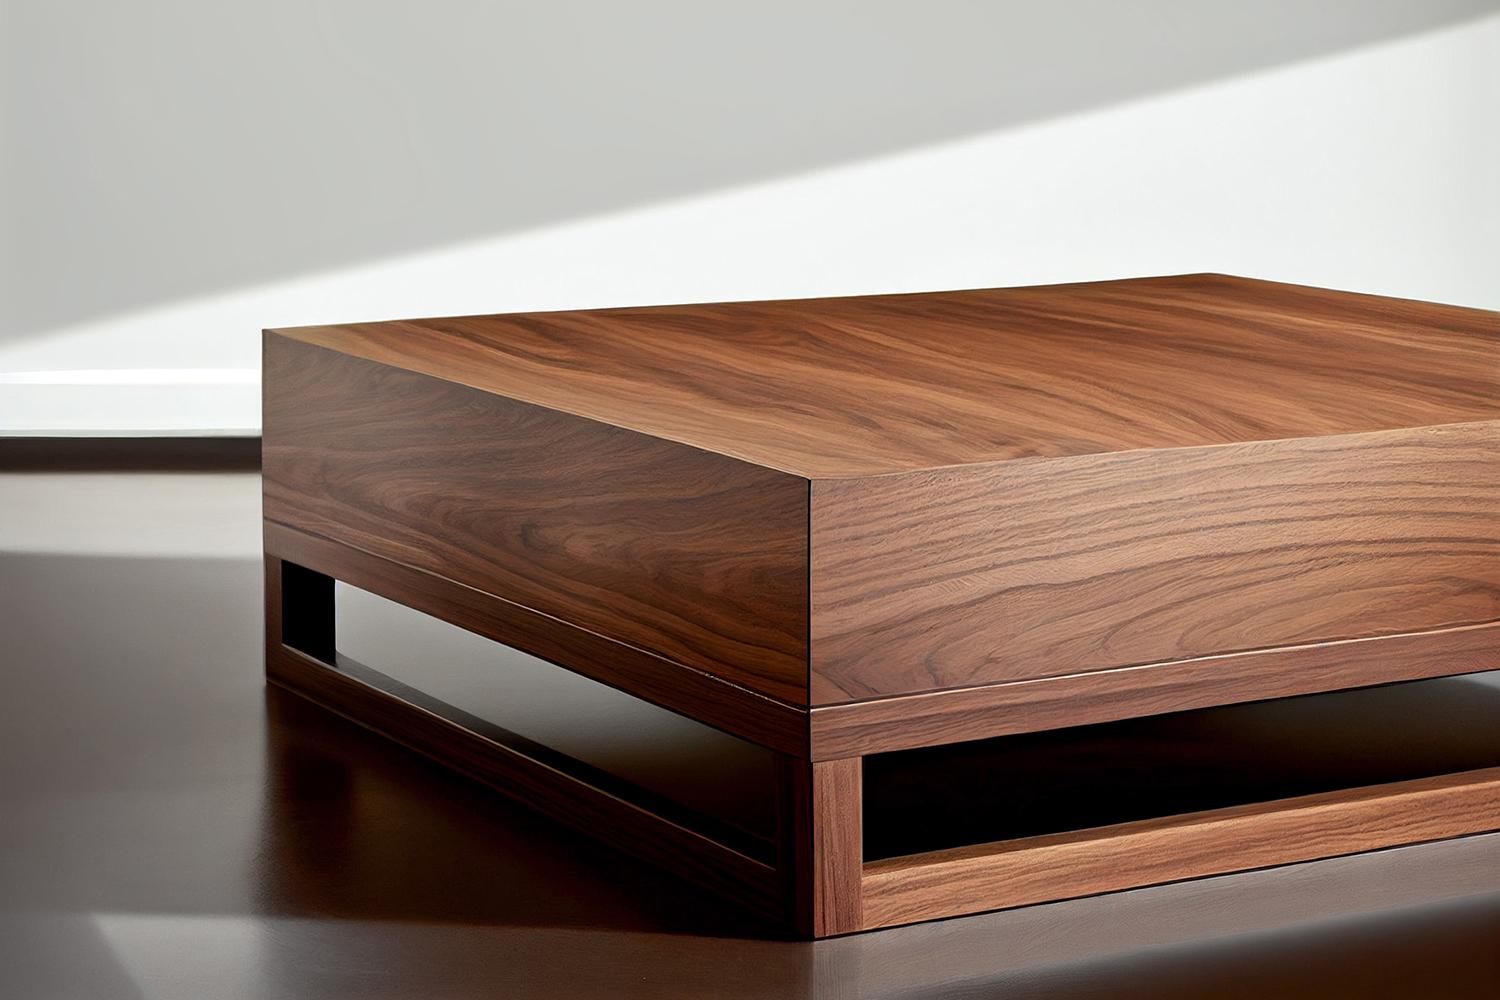 Mexican Minimalist Square Coffee Table in Walnut Veneer, Table by Joel Escalona  For Sale